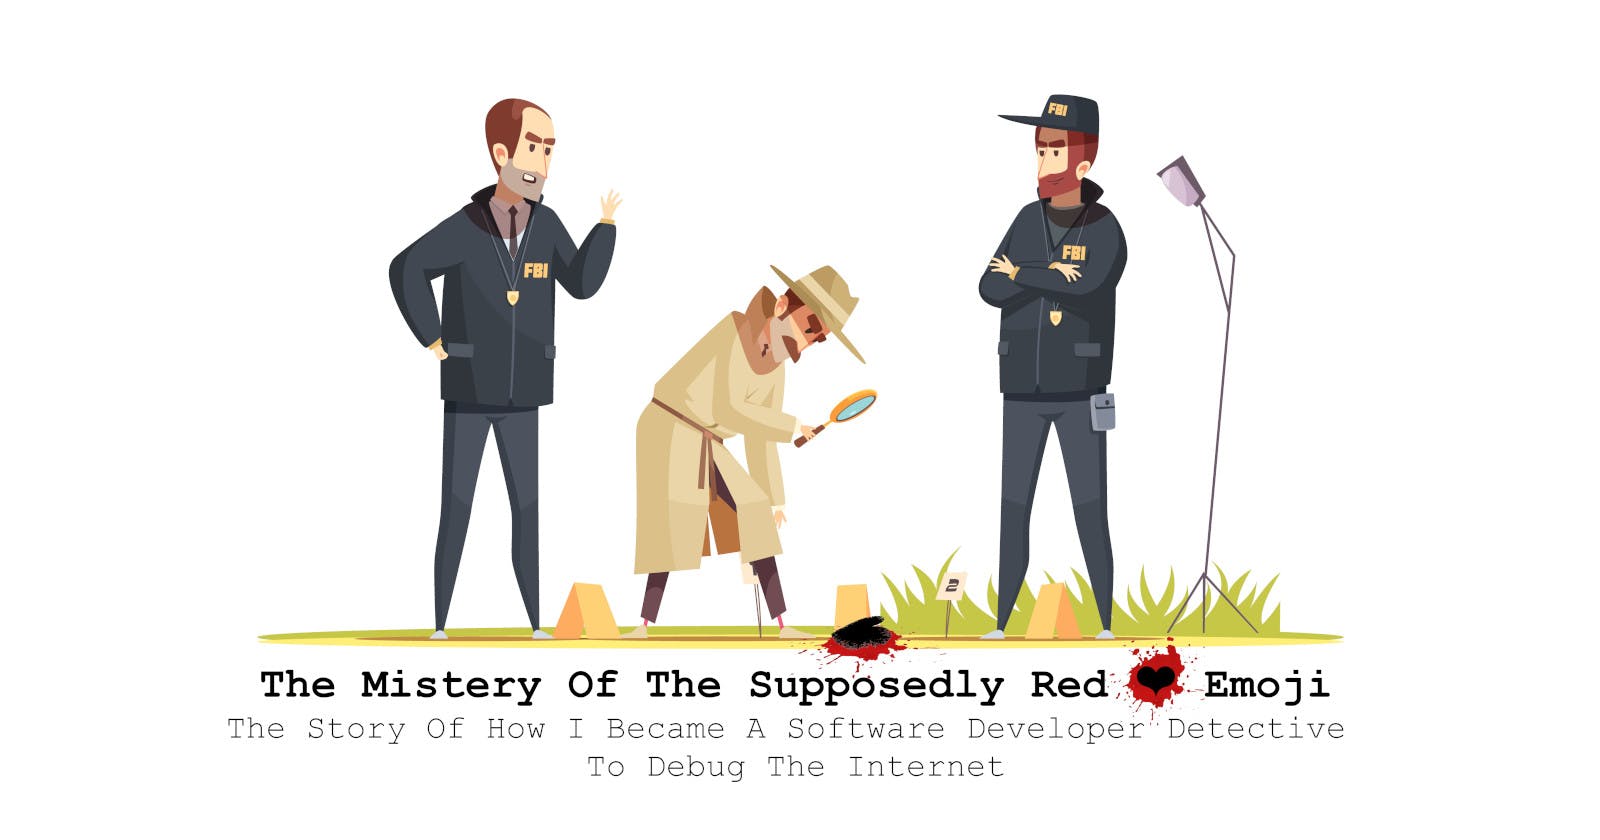 The Mystery Of The Supposedly Red ❤ Emoji AKA The Story Of How I Became A Software Developer Detective To Debug The Internet